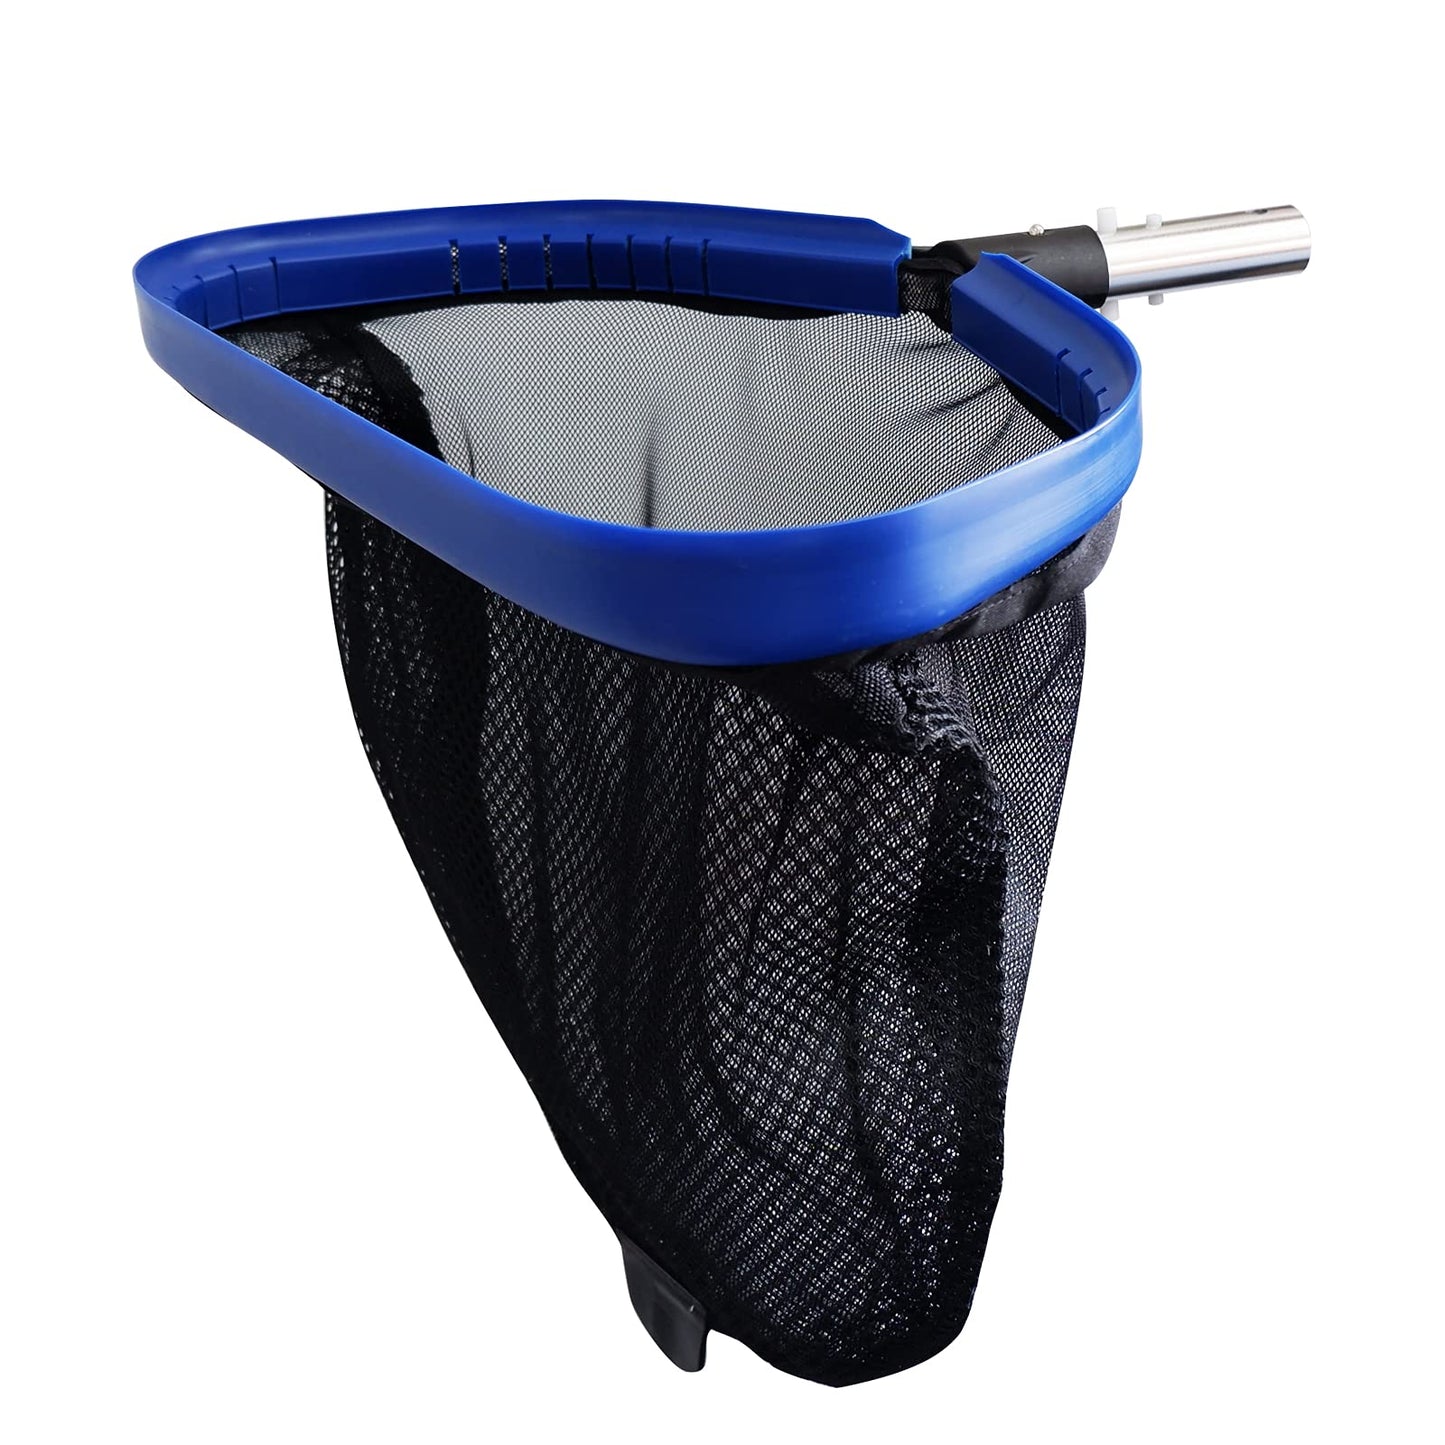 Poolvio Professional Heavy Duty Swimming Pool Leaf Skimmer Rake with Deep Double-Stitched Net Bag, Aluminum Frame & Handle for Faster Cleaning & Easier Debris Pickup and Removal Aluminum Frame Pool Rake